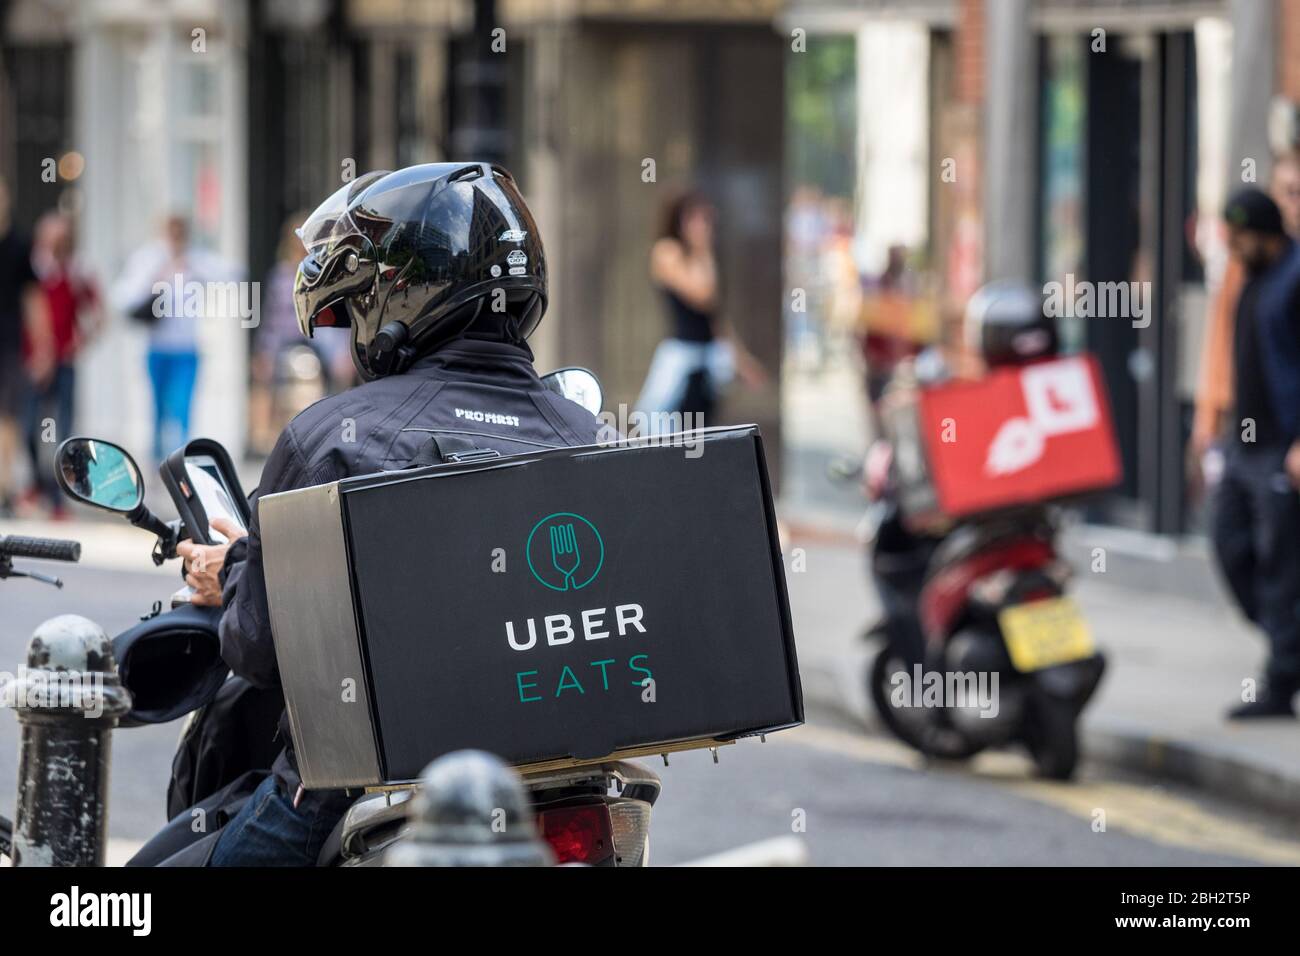 Uber Eats Food Delivery Courier. Uber Eats Scooter. Uber Easts Food Courier London. Stock Photo